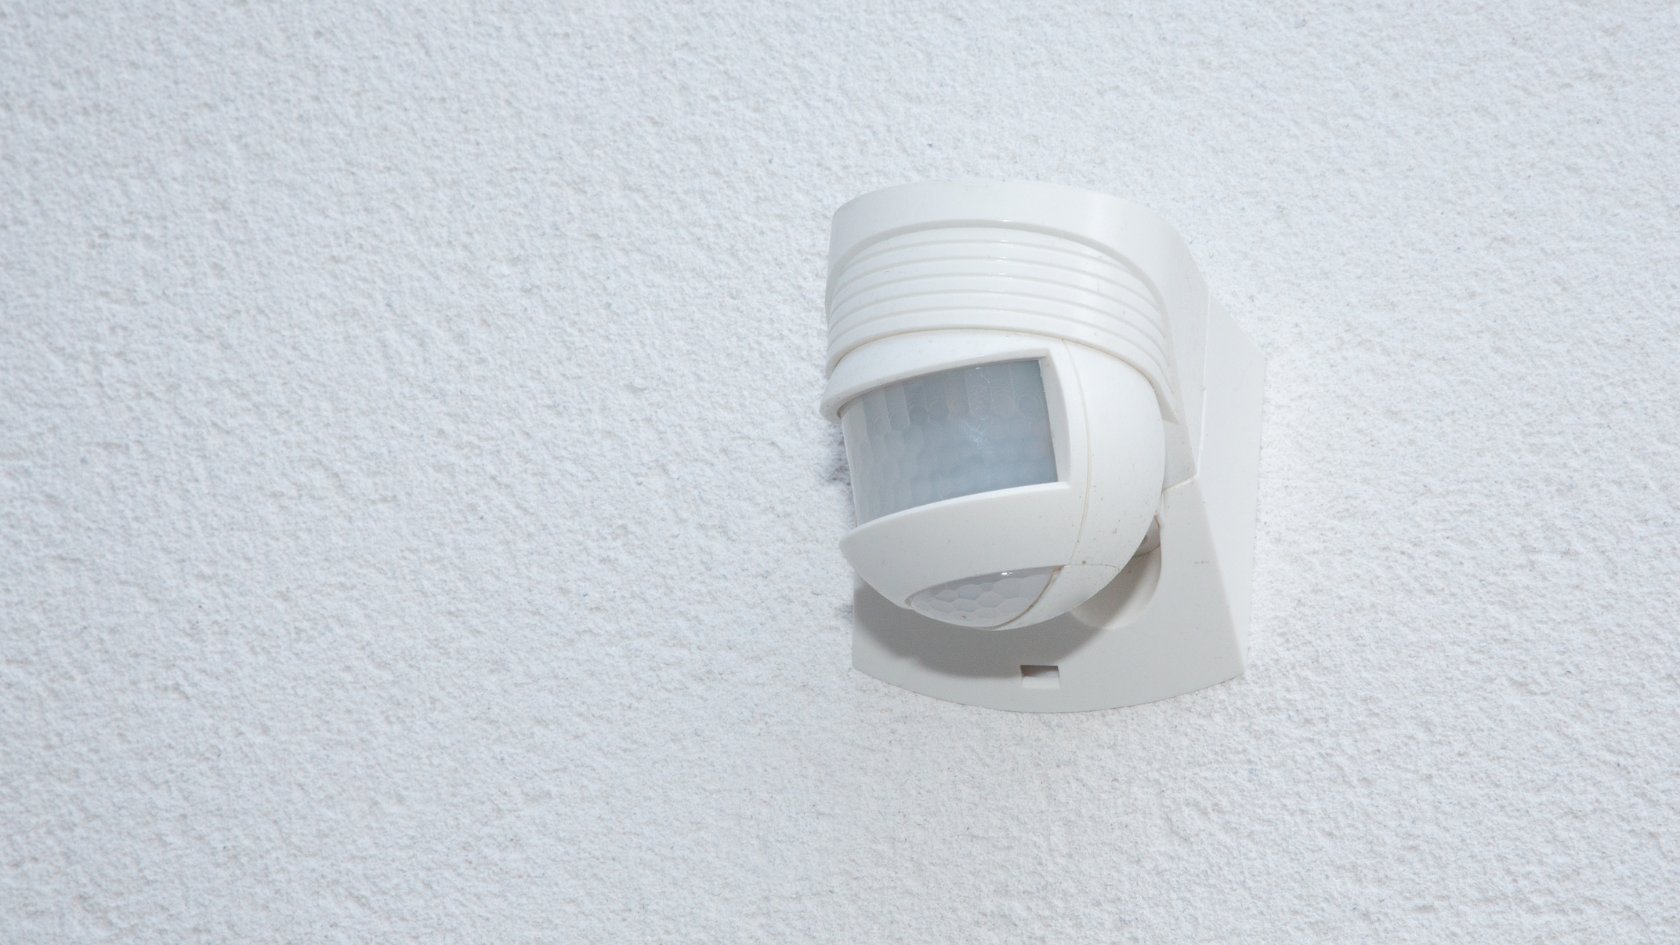 Which Motion Detector Can Call 3 Numbers When Triggered And Requires No Manual Monitoring